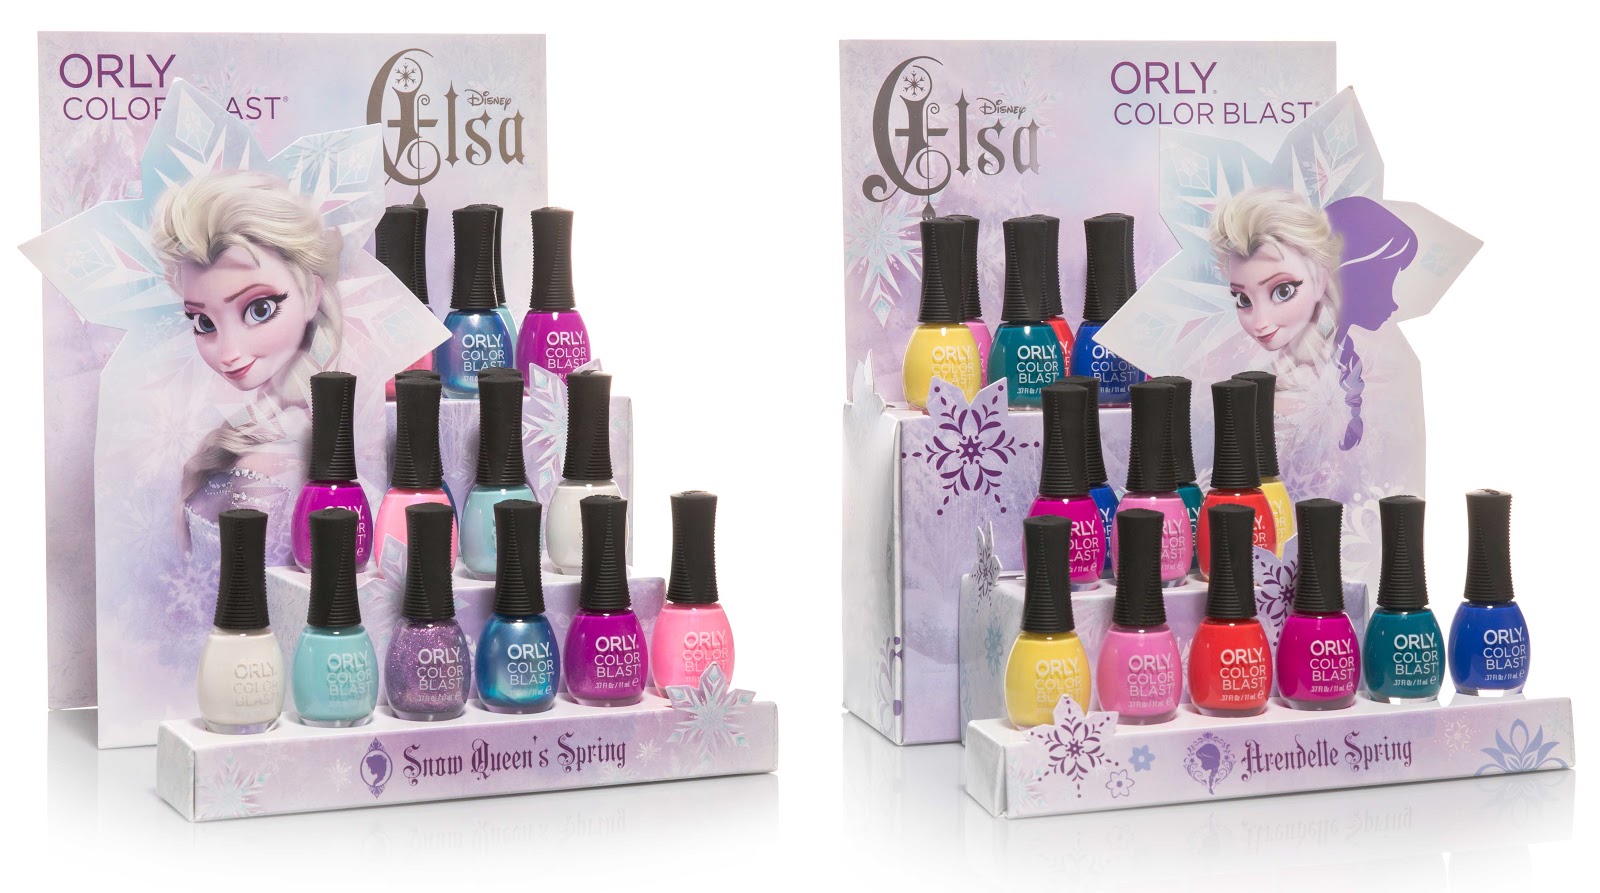 Orly Color Blast Nail Polish in "Halo" - wide 1